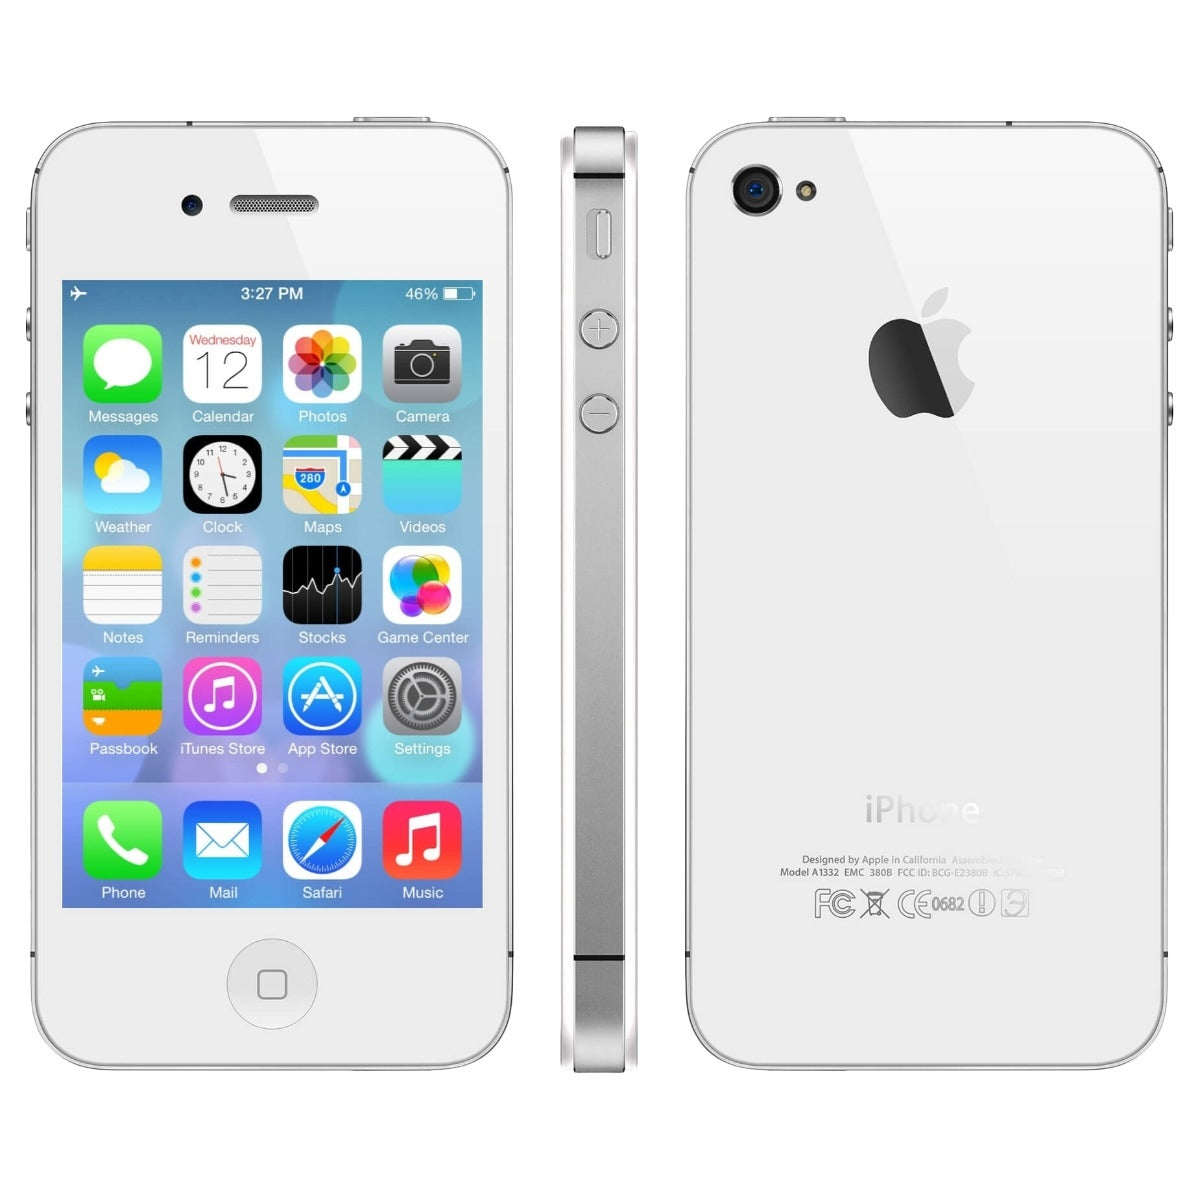 Apple iPhone 4S Factory Unlocked - Assorted Colors and Sizes / White / 8GB